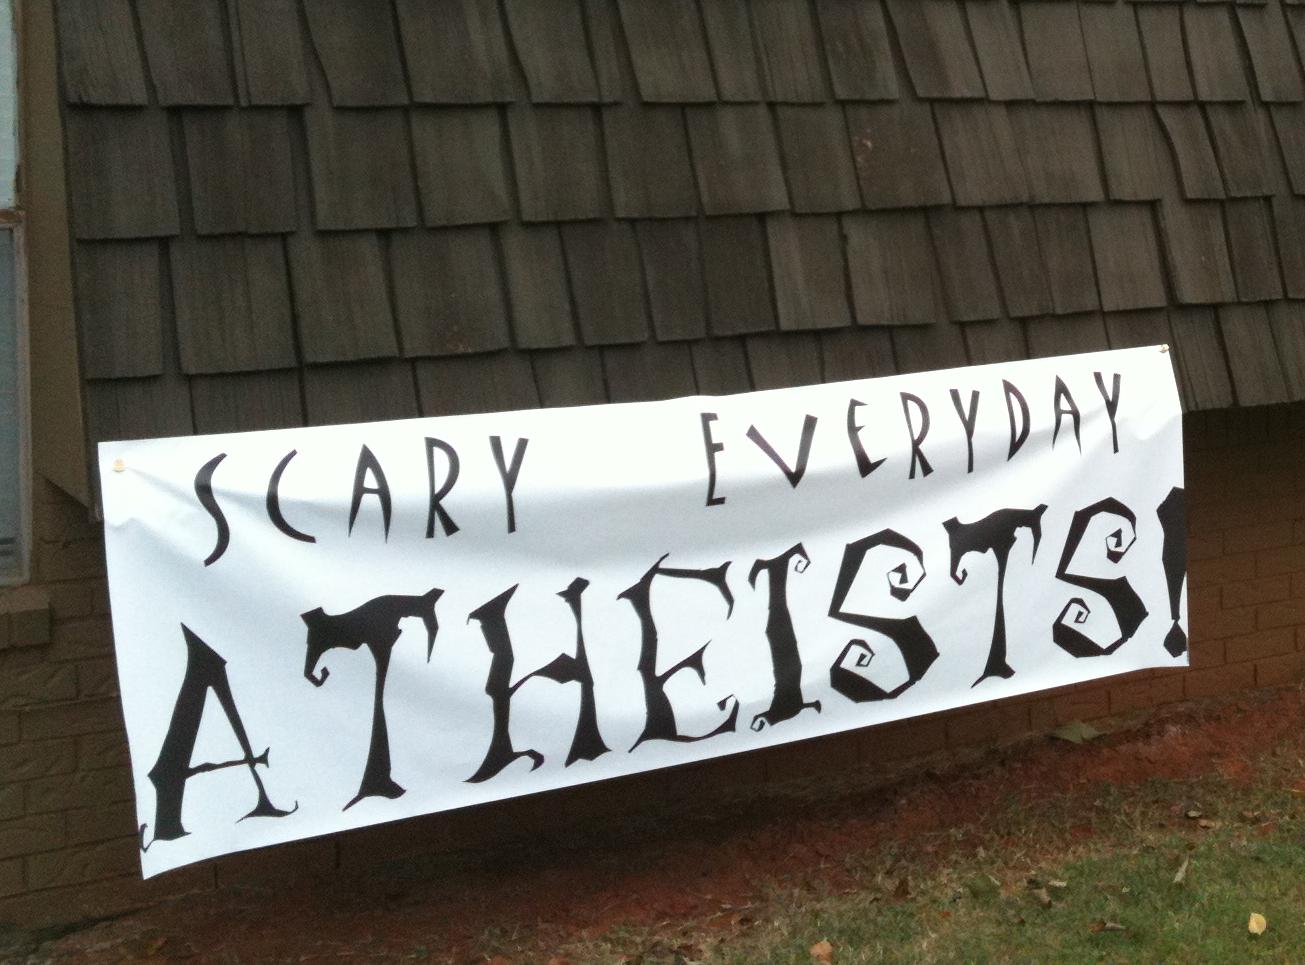 ["Scary Everyday Atheists" banner on the side of a house]